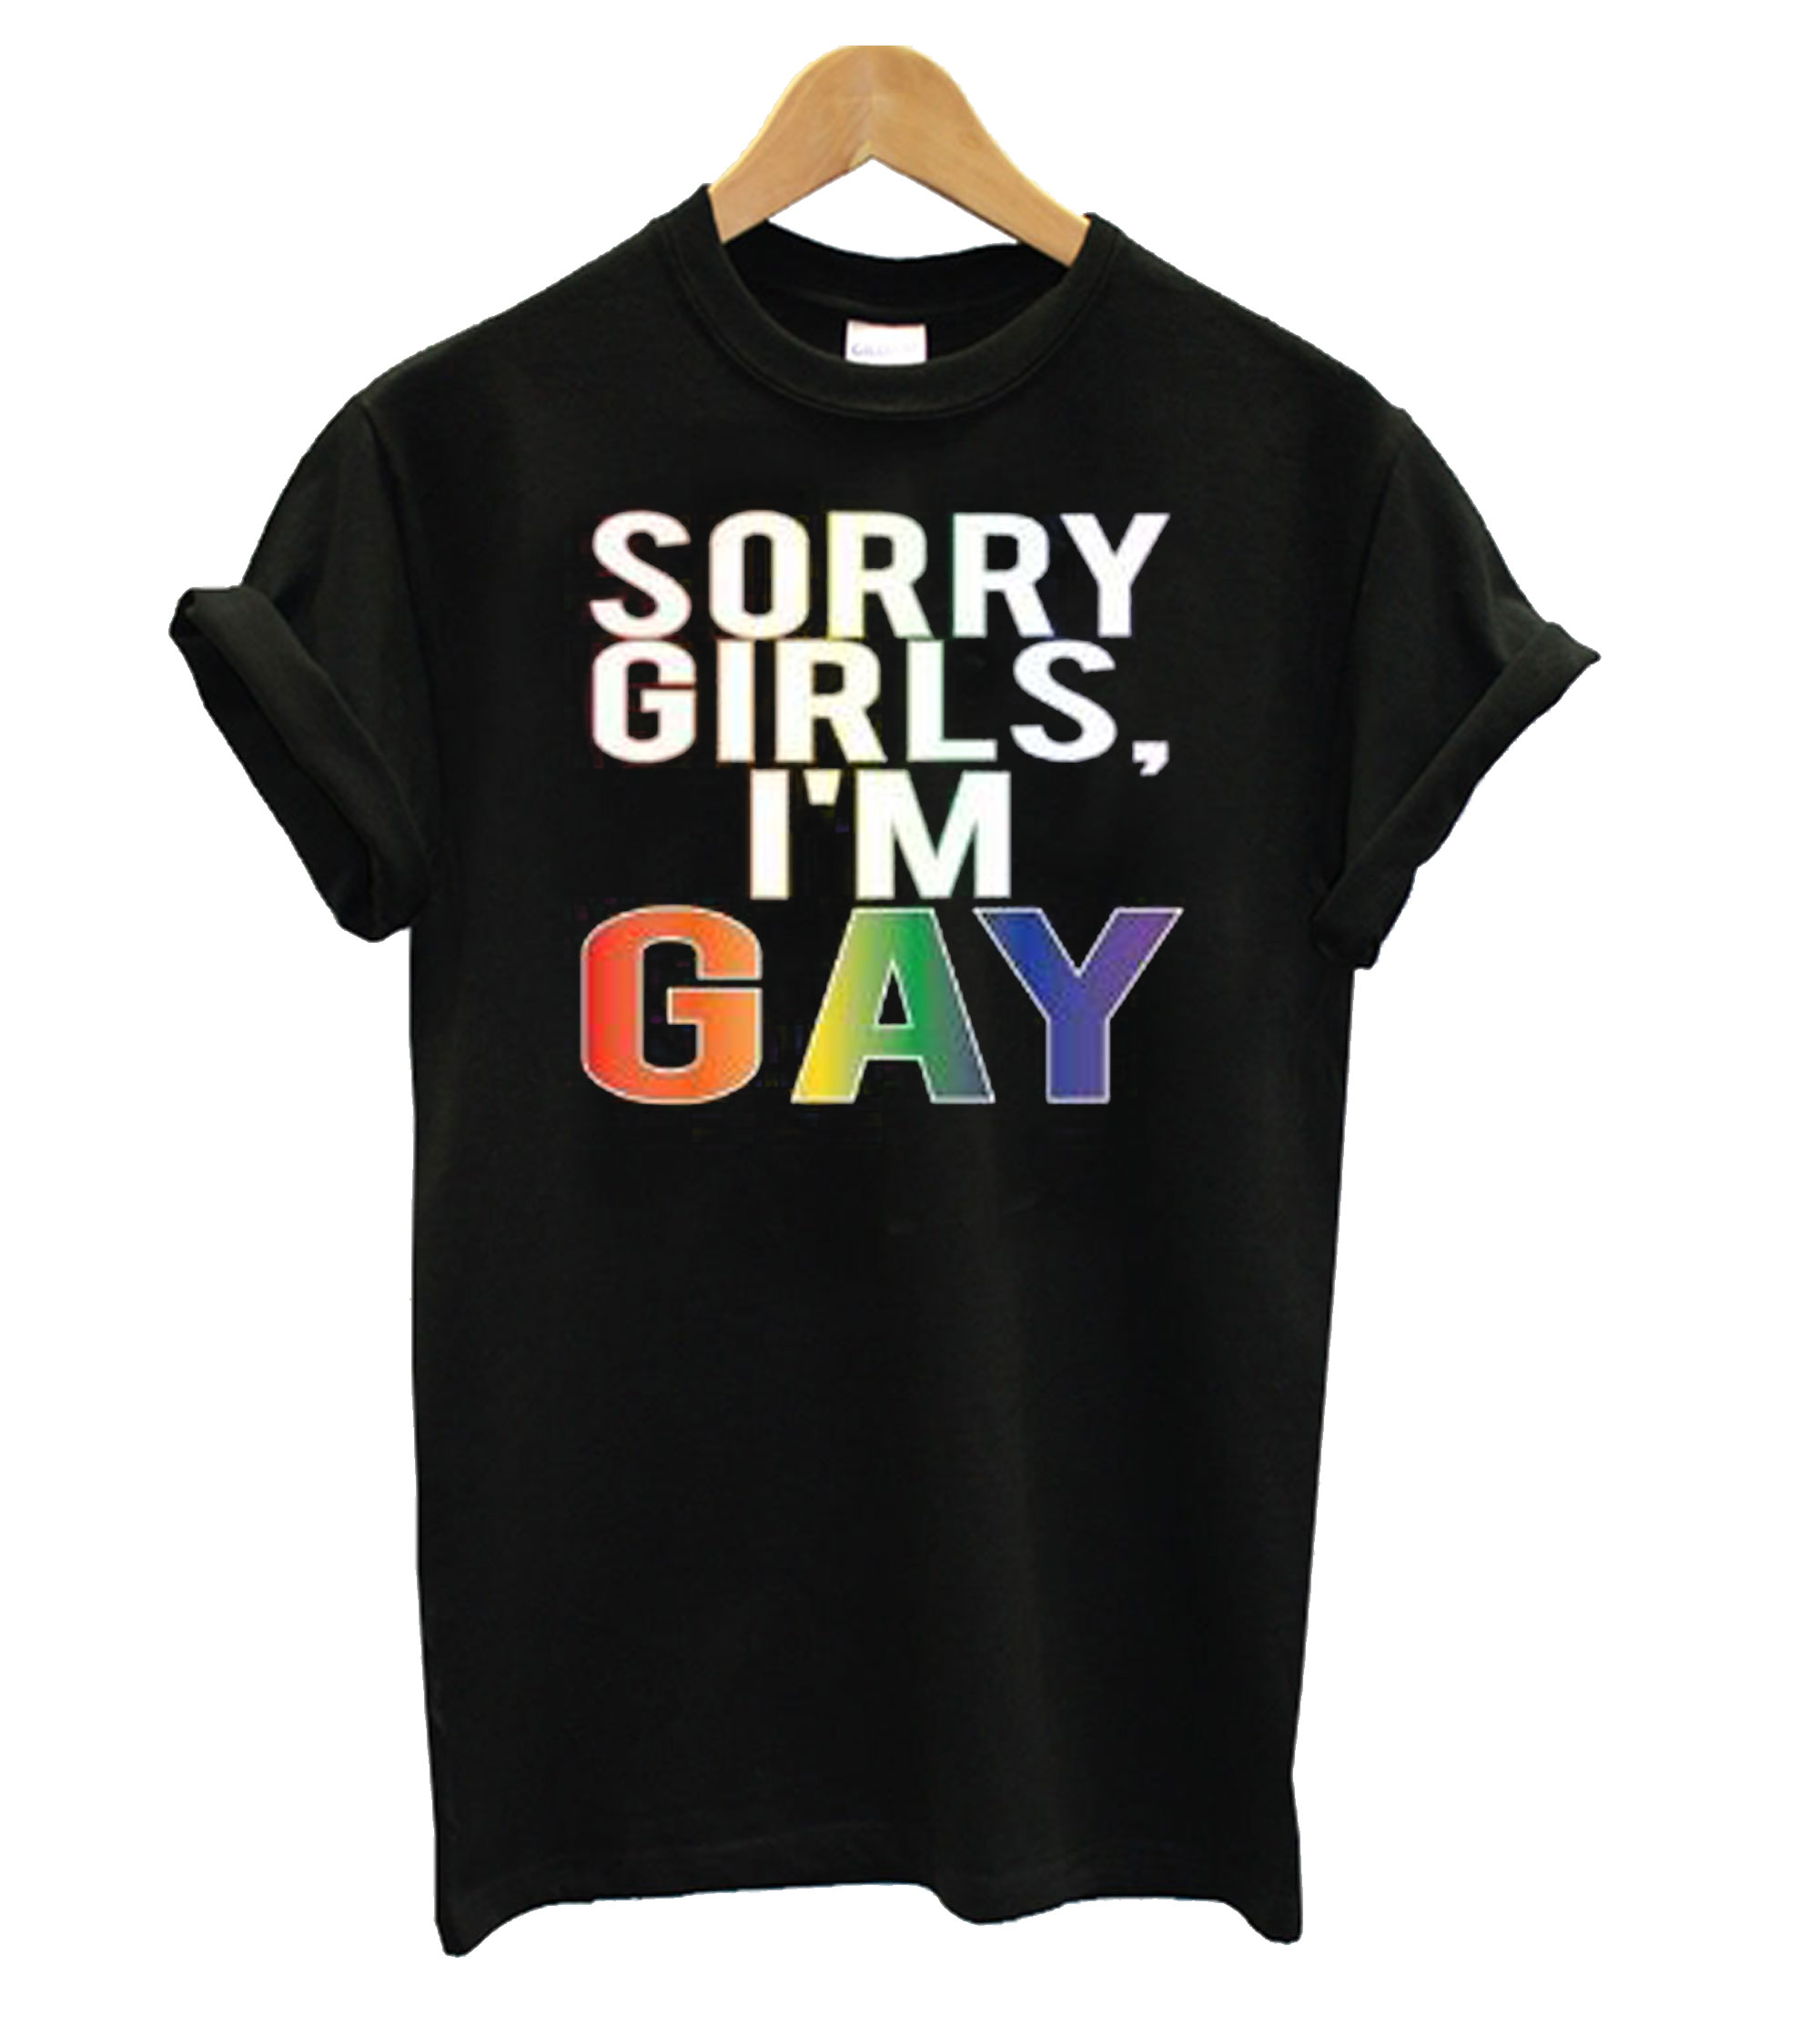 Best gay pride shirts - recoverydase